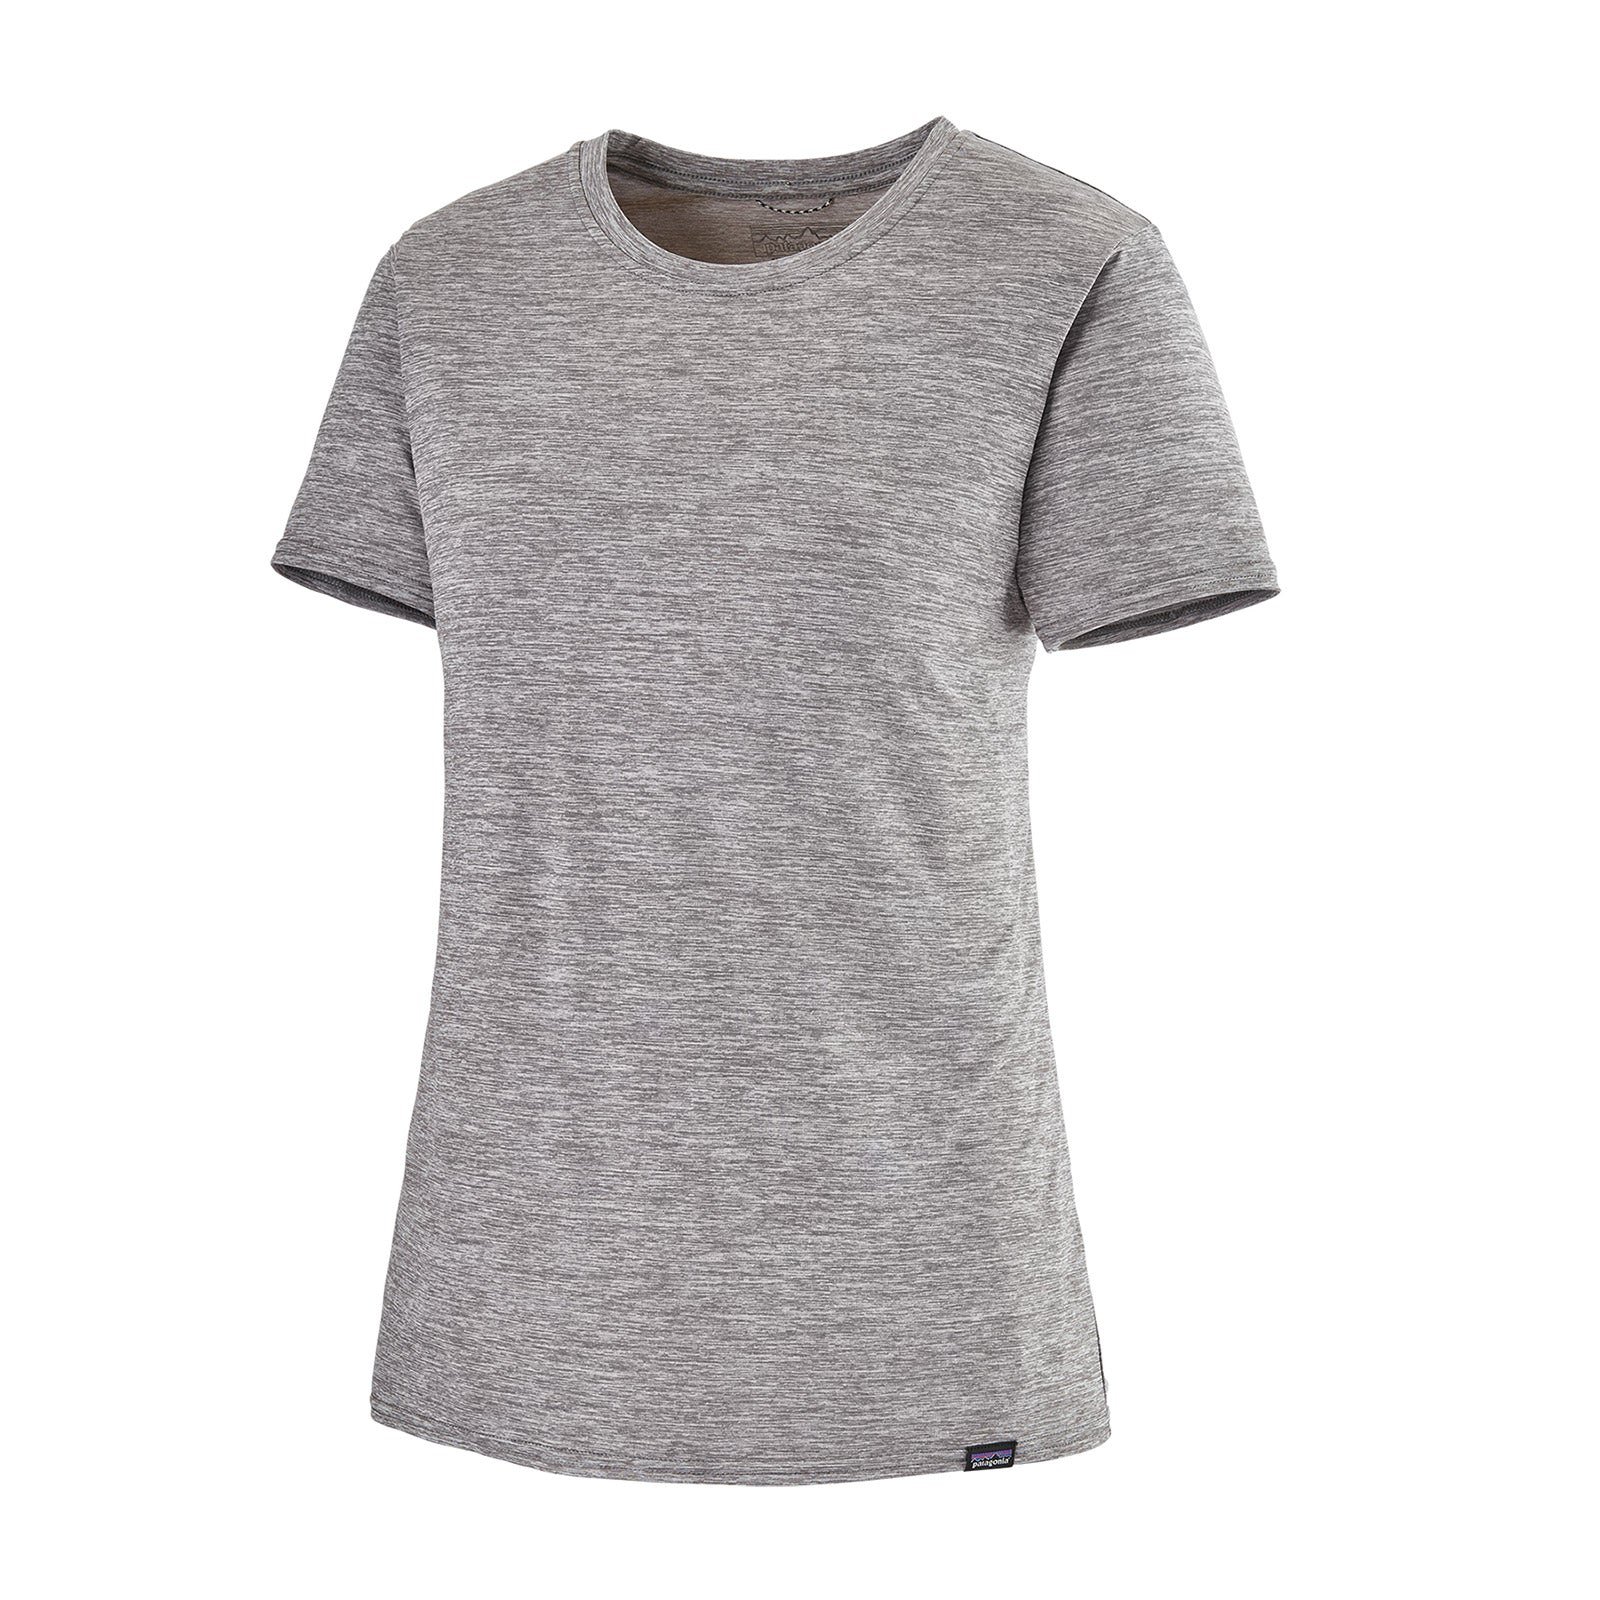 patagonia womens short sleeve capilene cool daily shirt in feather grey, front view